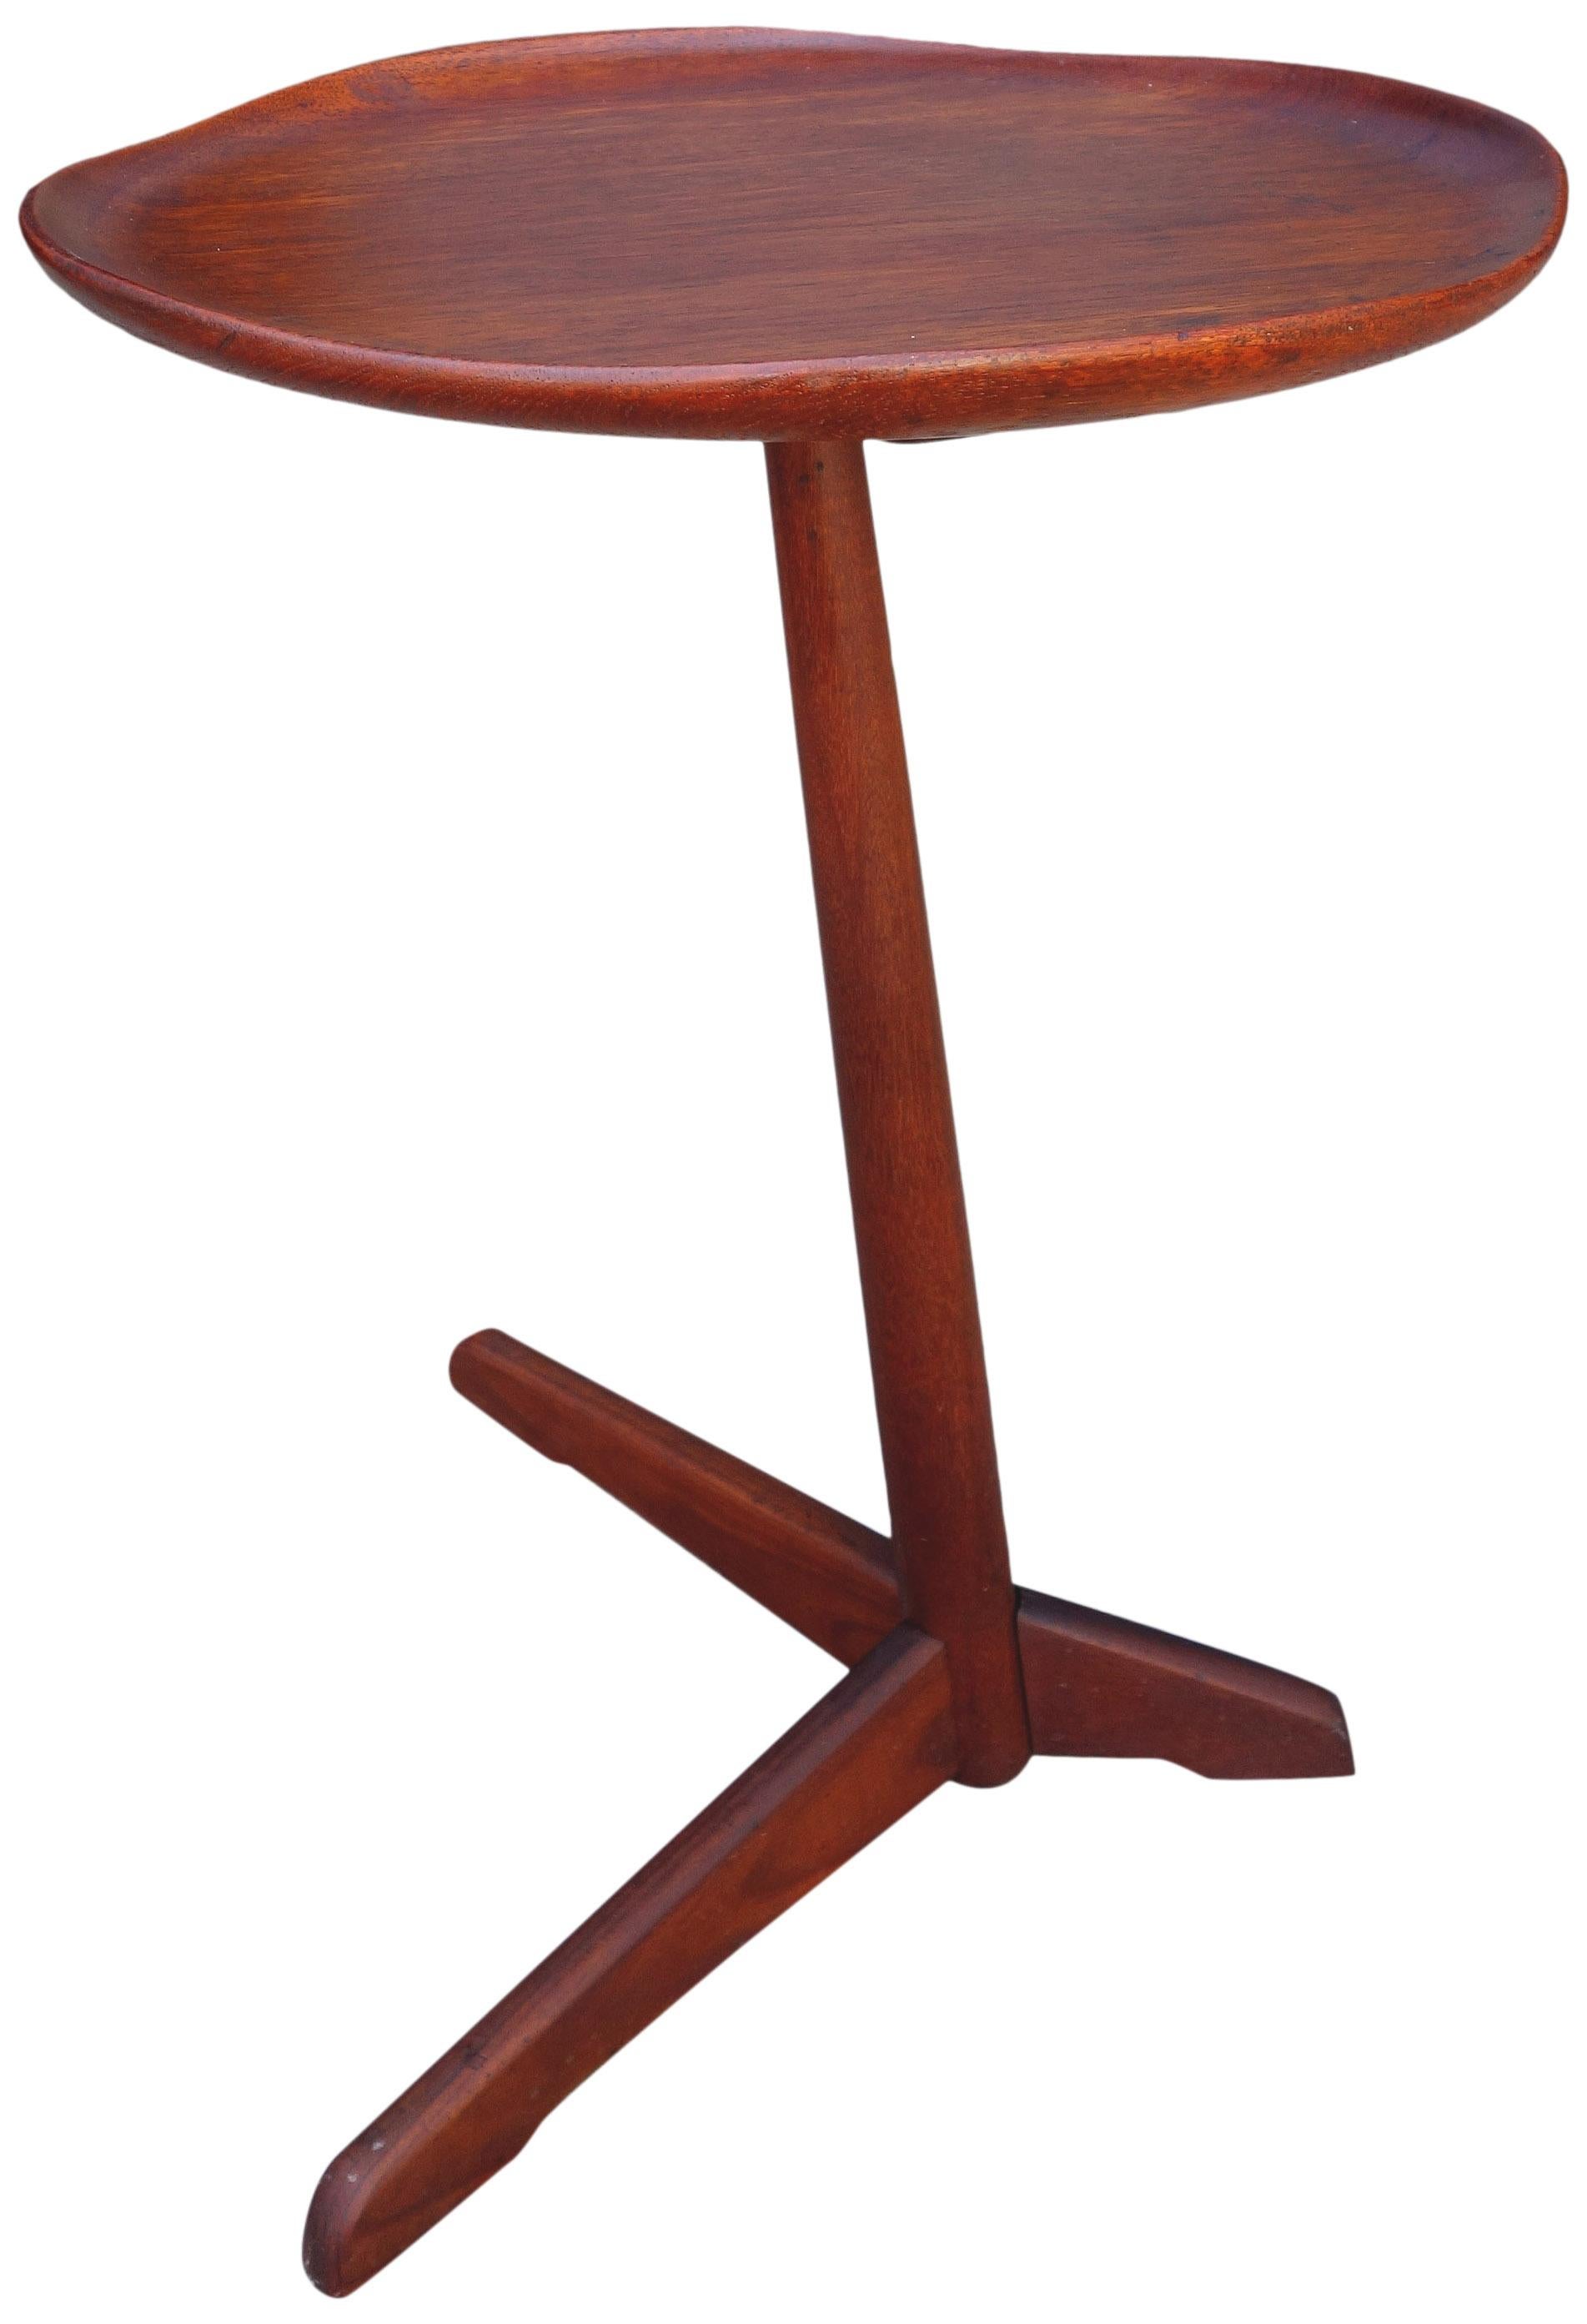 For your consideration is this amazing side table made in Norway produced by Steen and Strom. A cantilevered designed side table with a solid turned teak post and an irregular and raised edge tabletop. A three legged forked base supports the table.